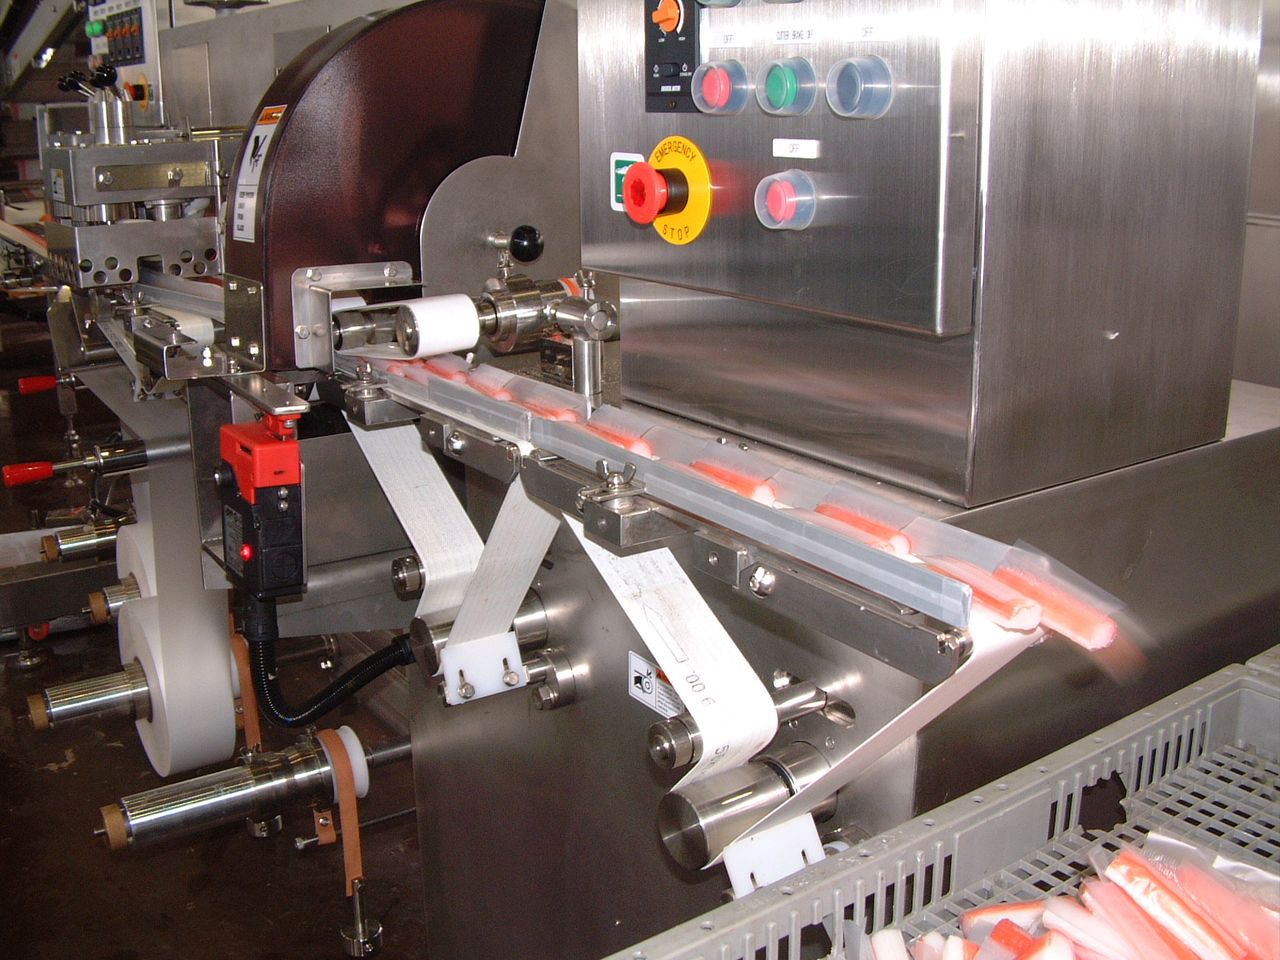 Surimi manufacturing lines have undergone significant technological advancement. (Courtesy of Yanagiya)